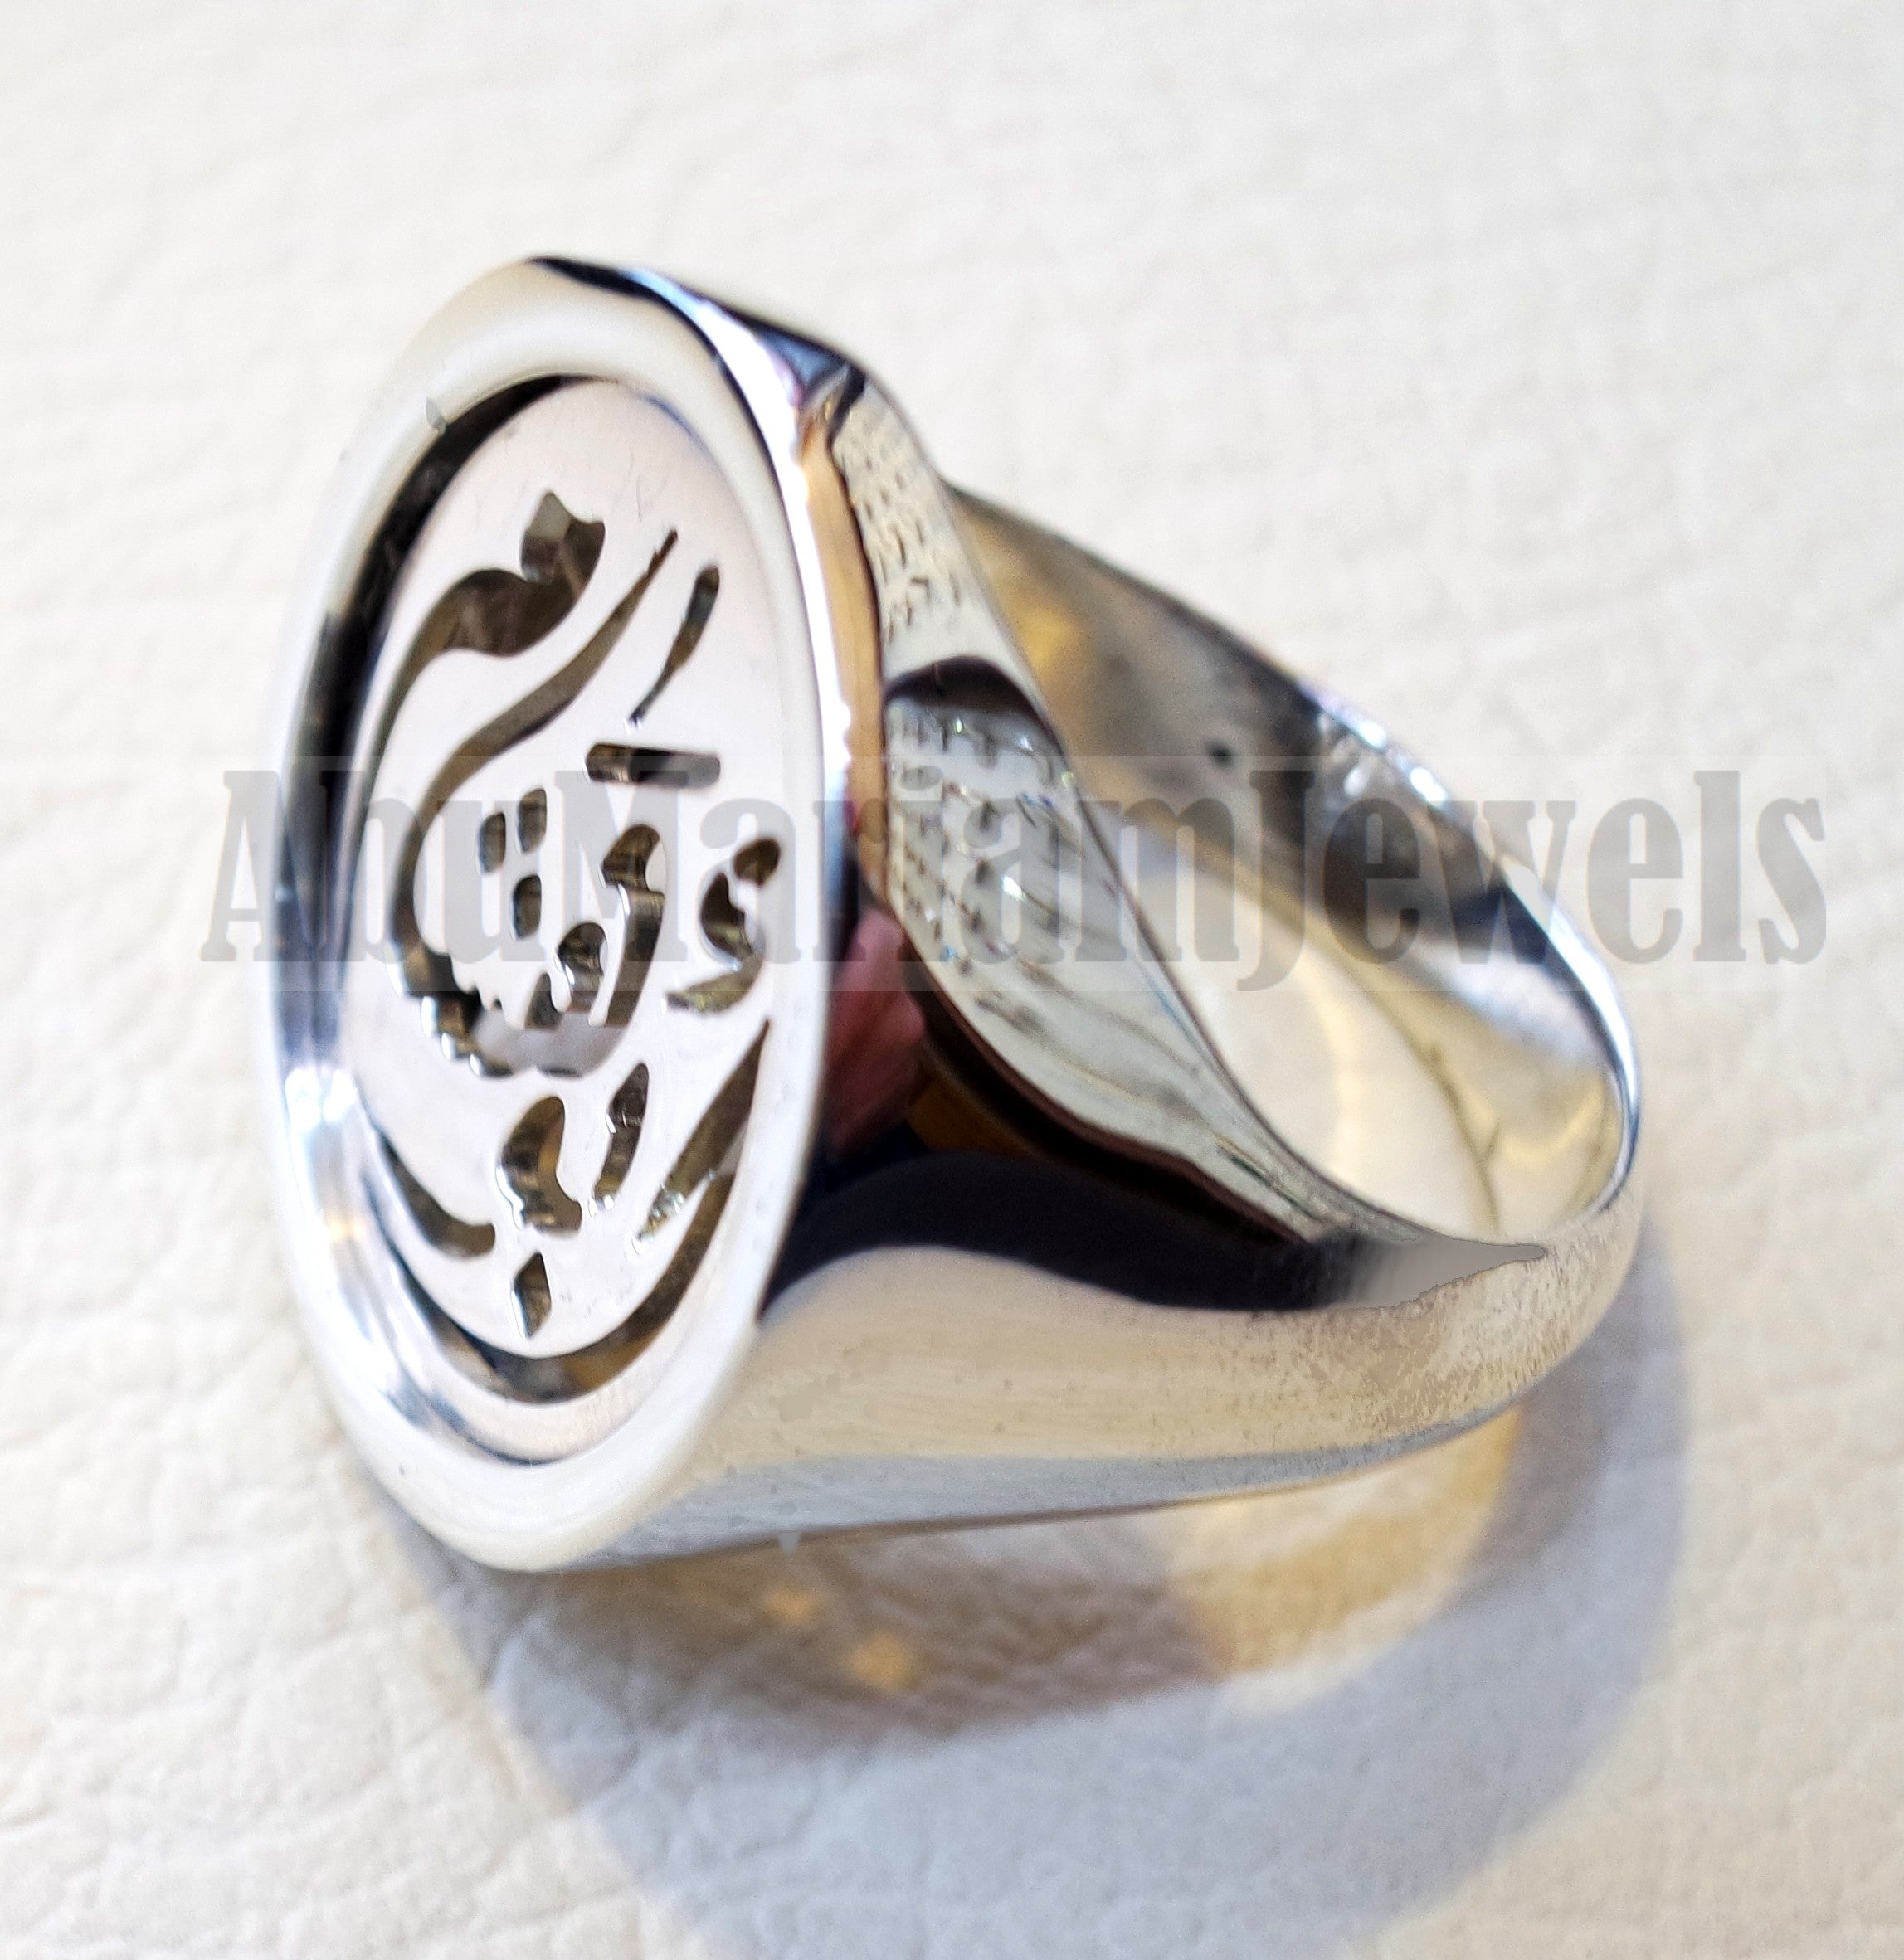 Customized Arabic calligraphy names handmade round heavy ring personalized jewelry sterling silver 925 any size AMM1001 خاتم اسم تفصيل